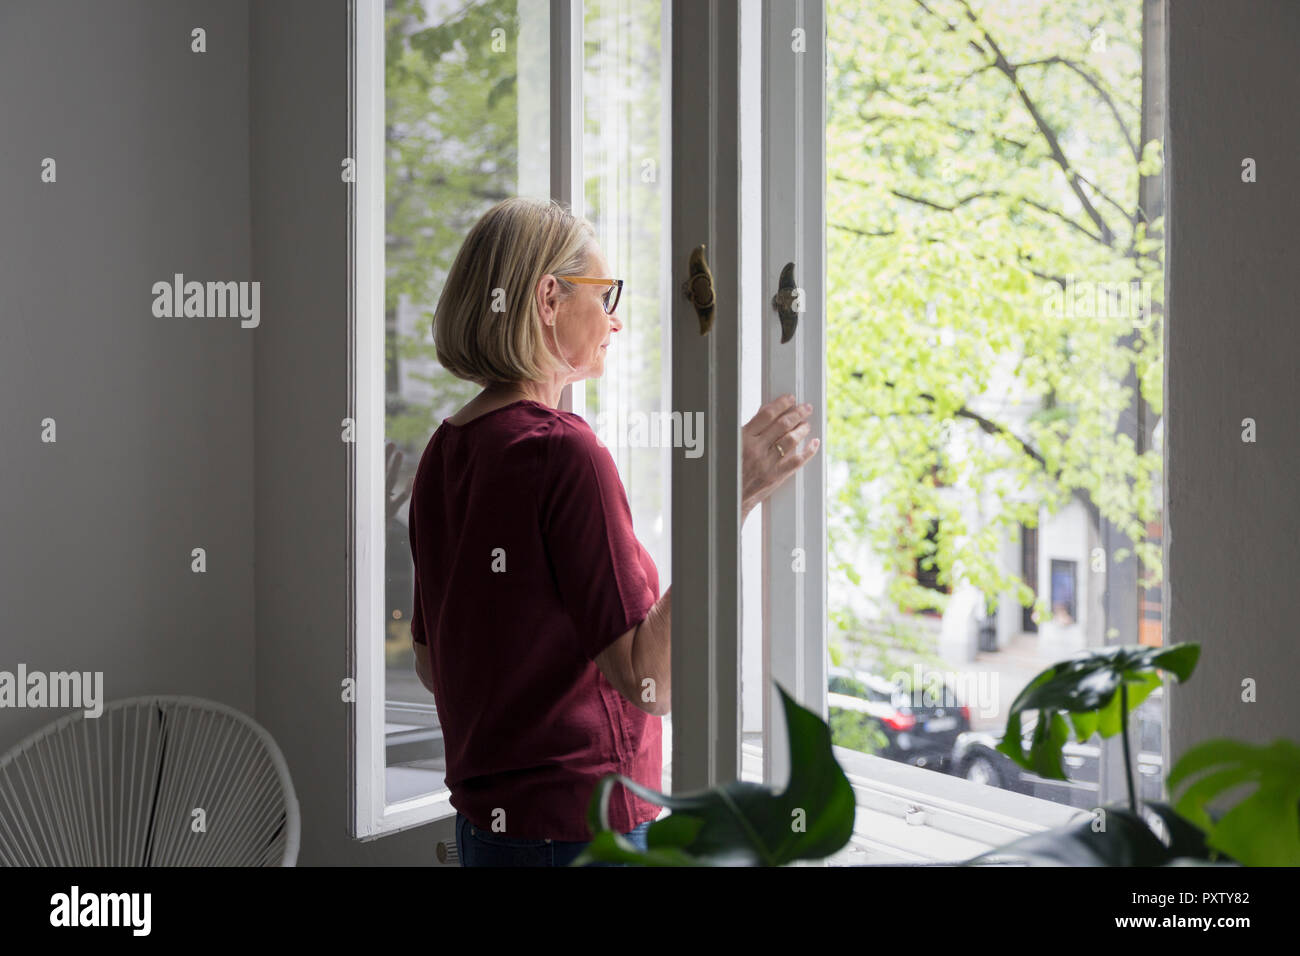 Mature woman at home opening the window Stock Photo